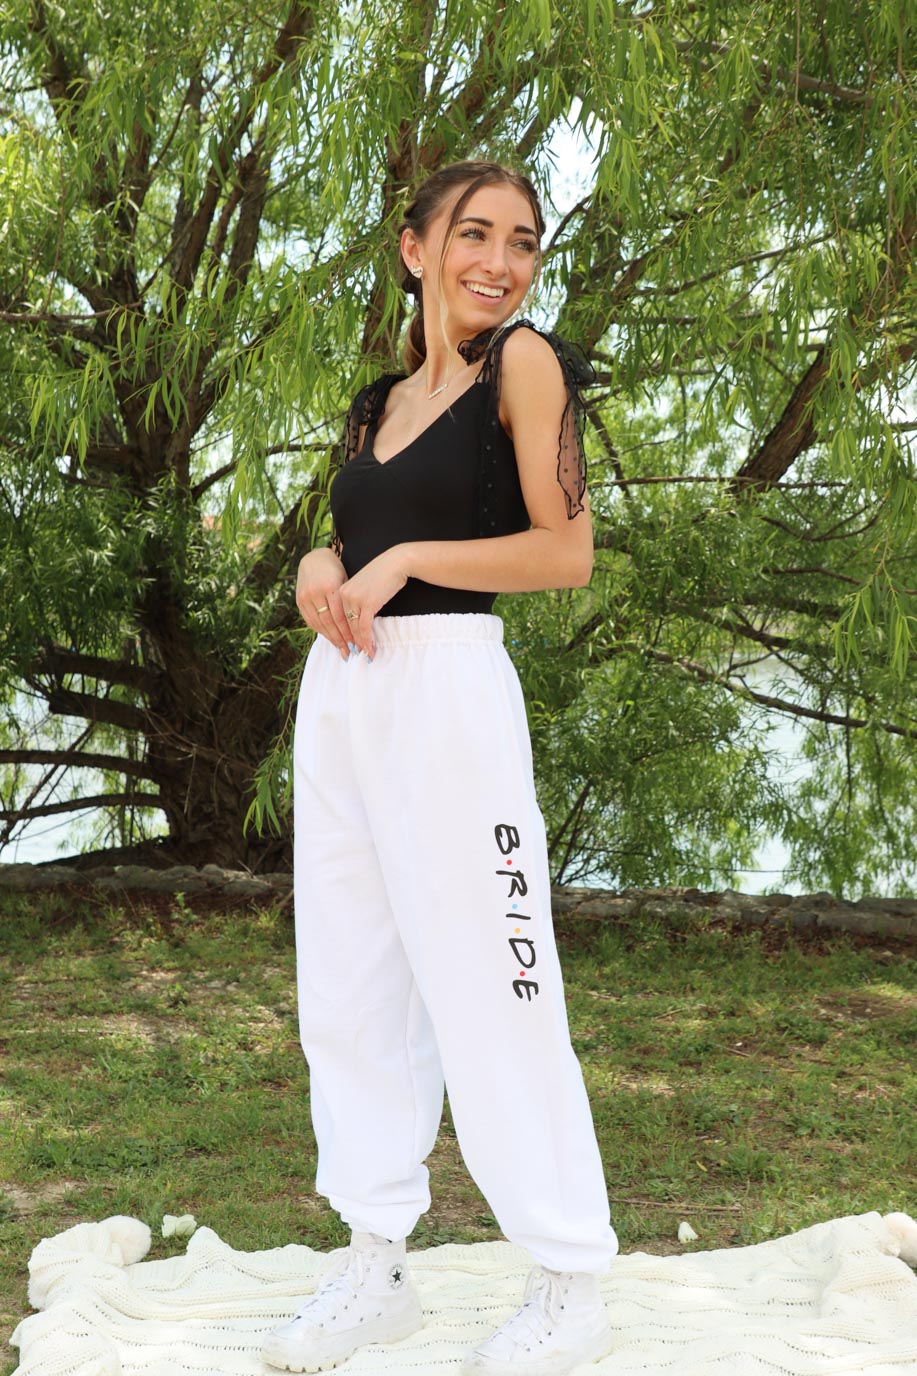 girl wearing white sweatpants with "bride" letter detailing